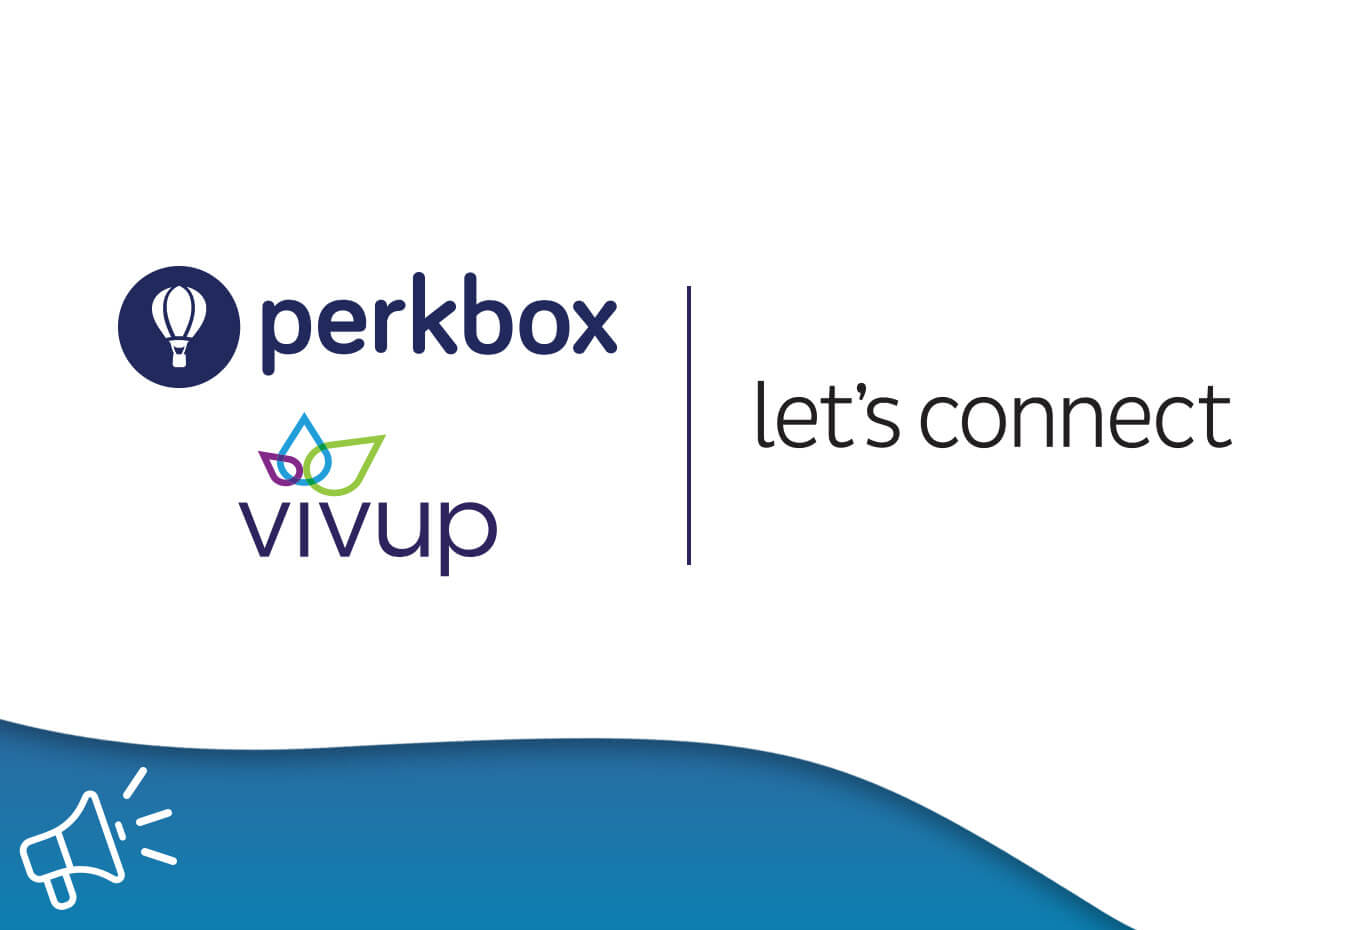 The Perkbox Vivup Group is to acquire Let’s Connect from Personal Group Holdings Plc